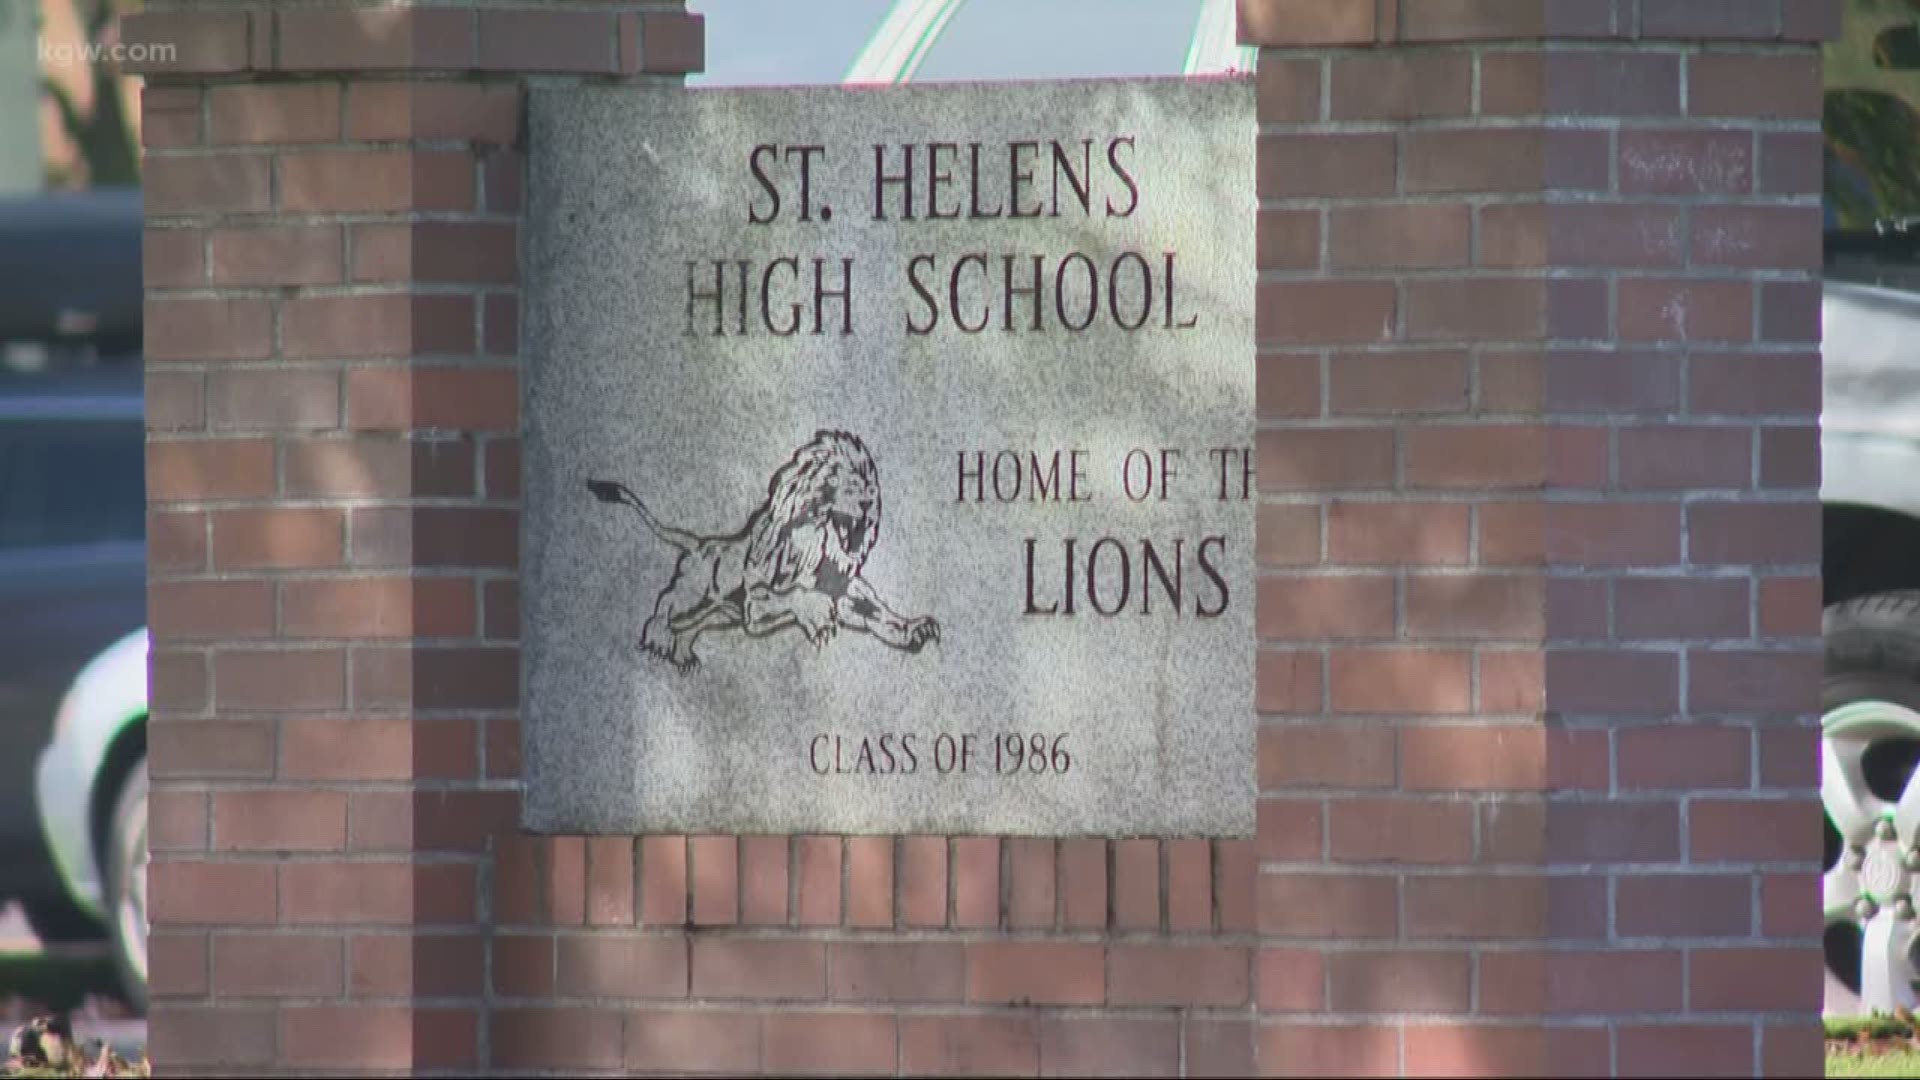 A St. Helens High School student died Monday and doctors suspect bacterial meningitis may have caused his death. Paul Lewis, 16, was a sophomore.